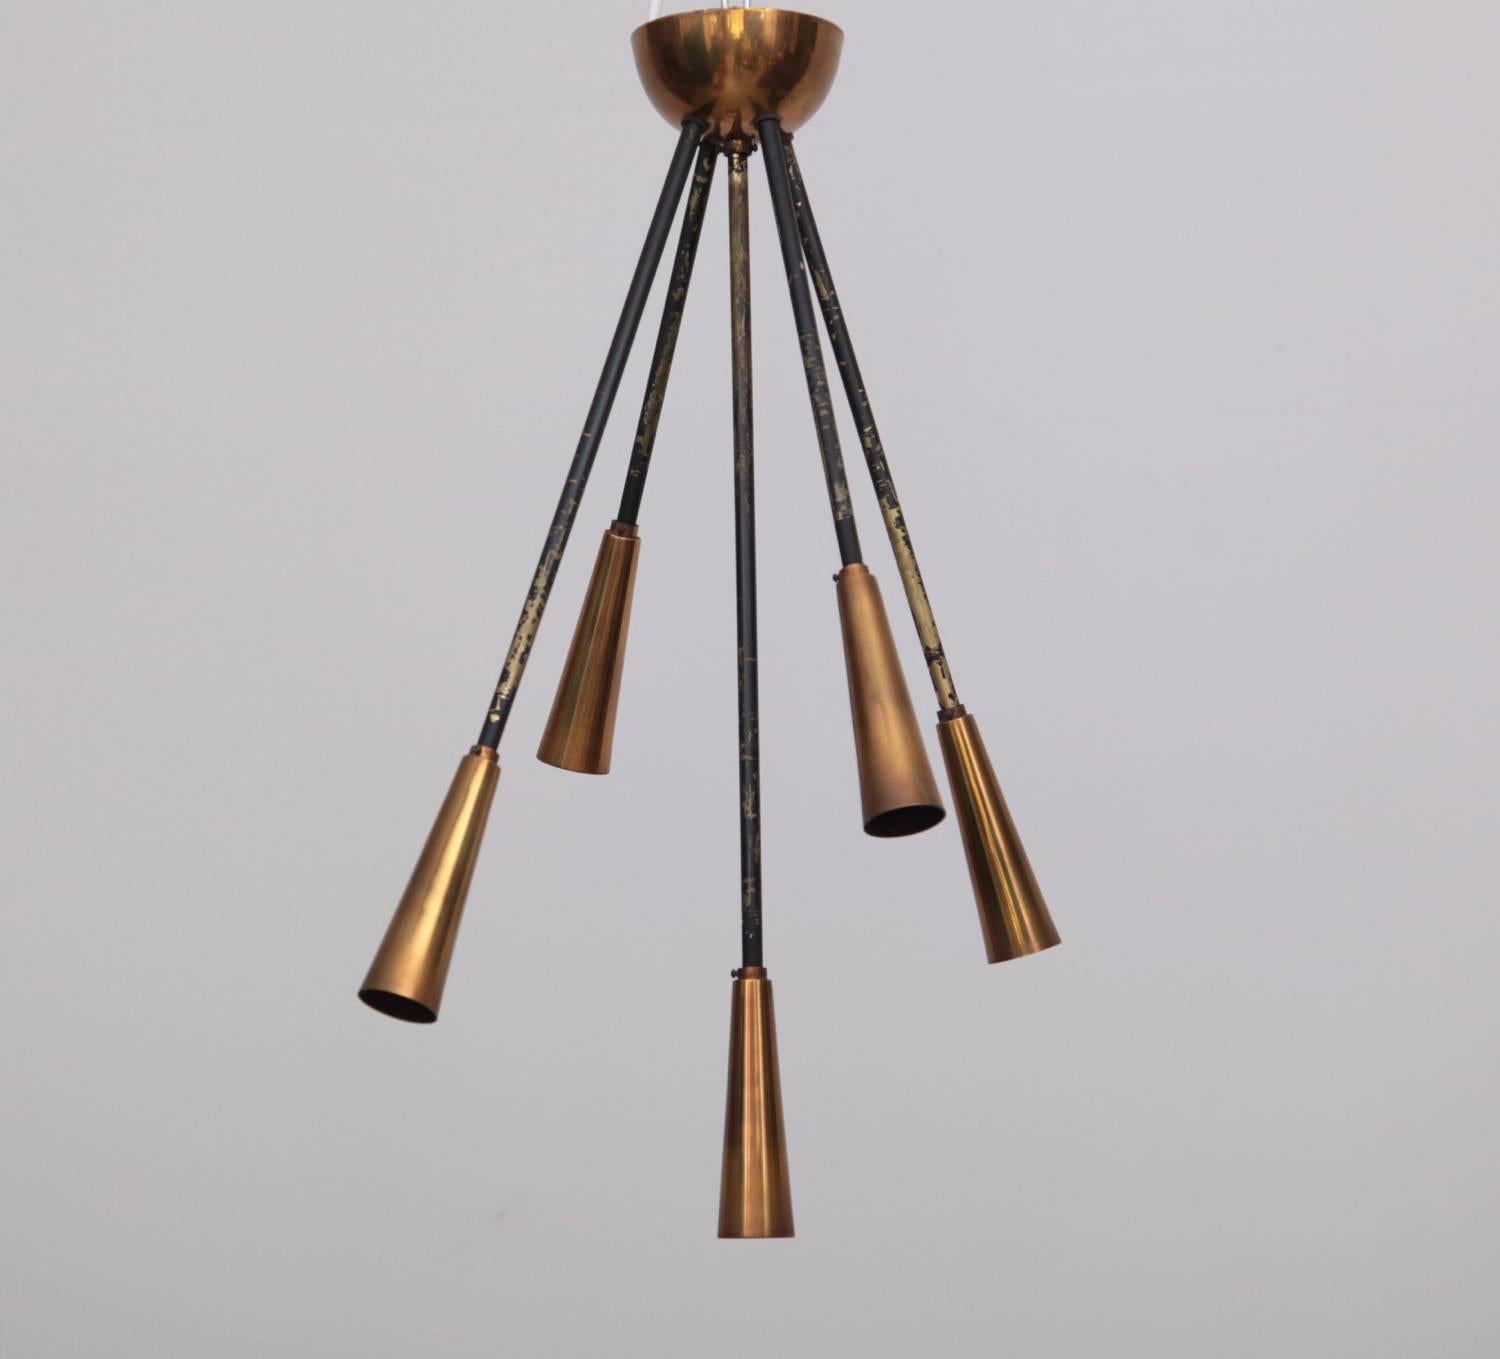 This lamp is absolute fantastic and rare. The little bulbs are hidden in the brass part so you will be blended by the light. Absolute important Italian lightning. Five x E14.

